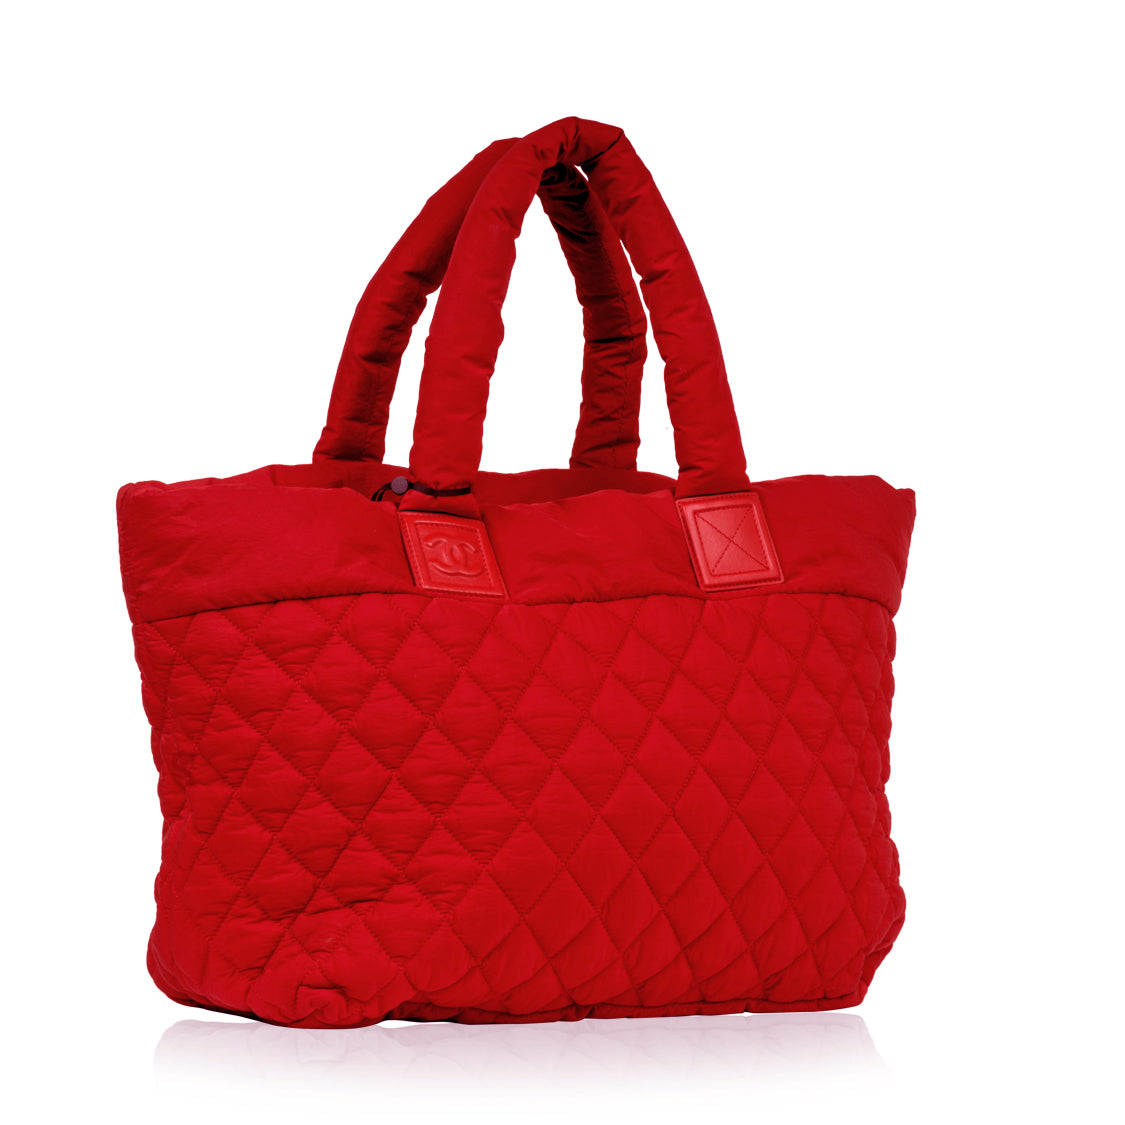 Chanel Chanel Red Nylon Tote large Beach bag flower X588